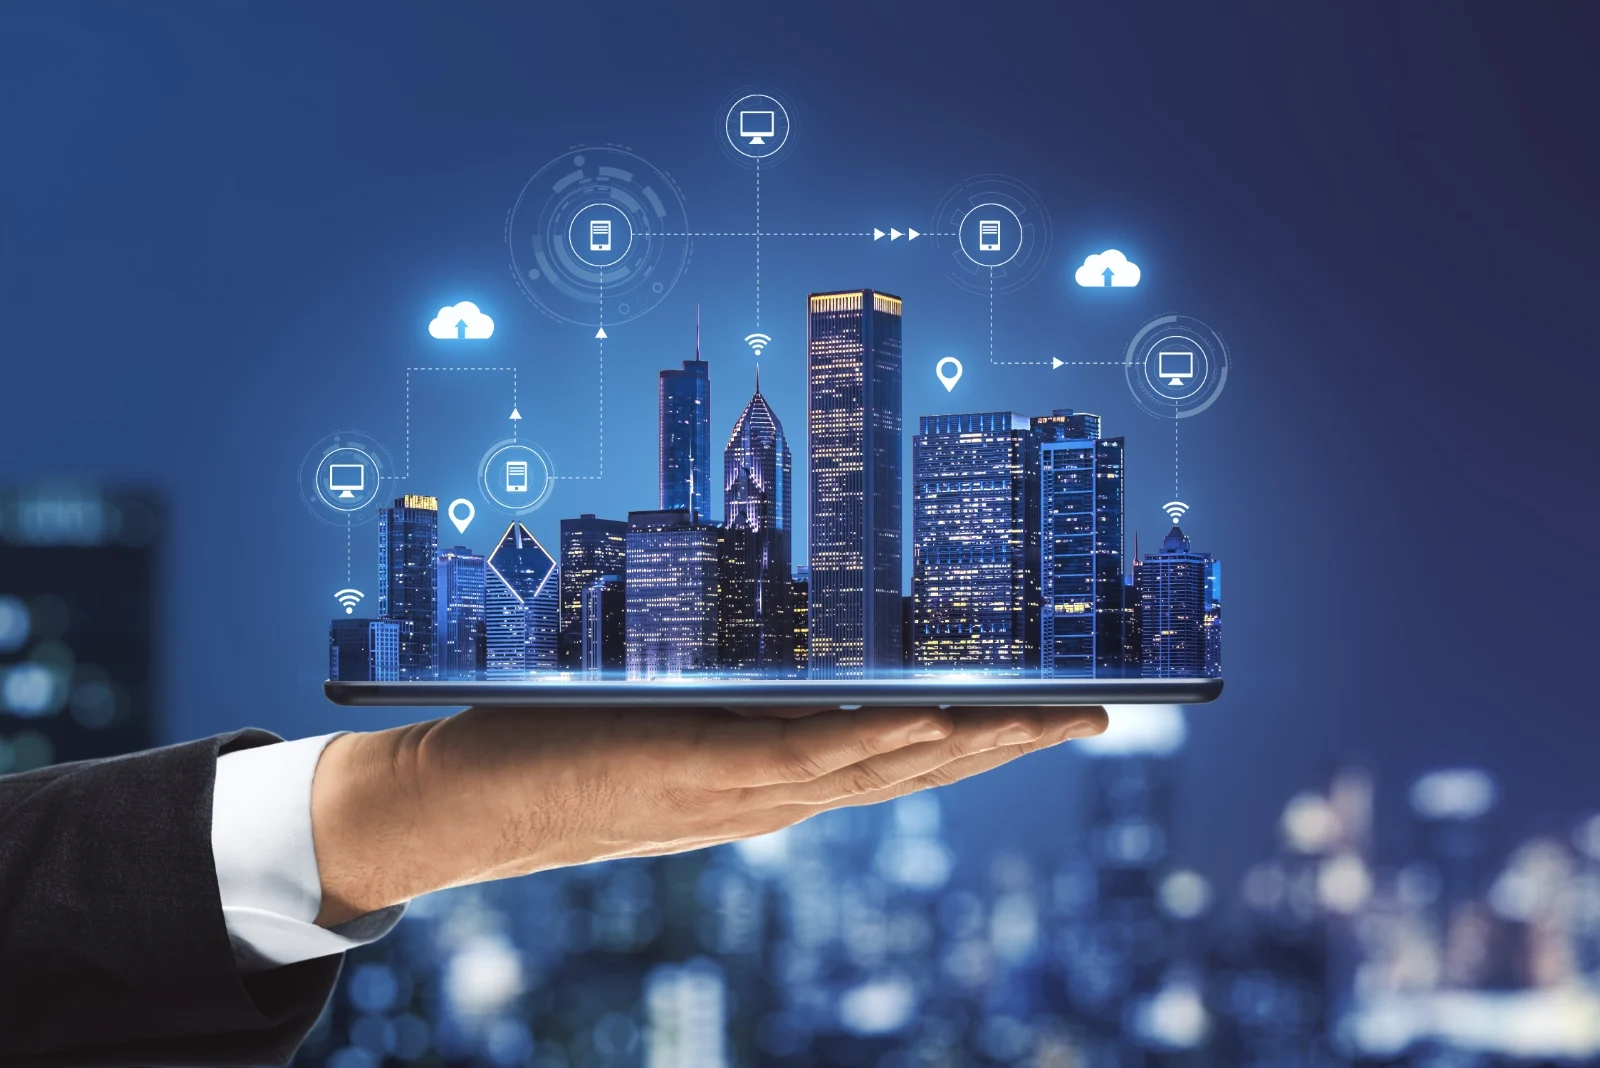 Smart Building Technology: Concept, Features, and Application